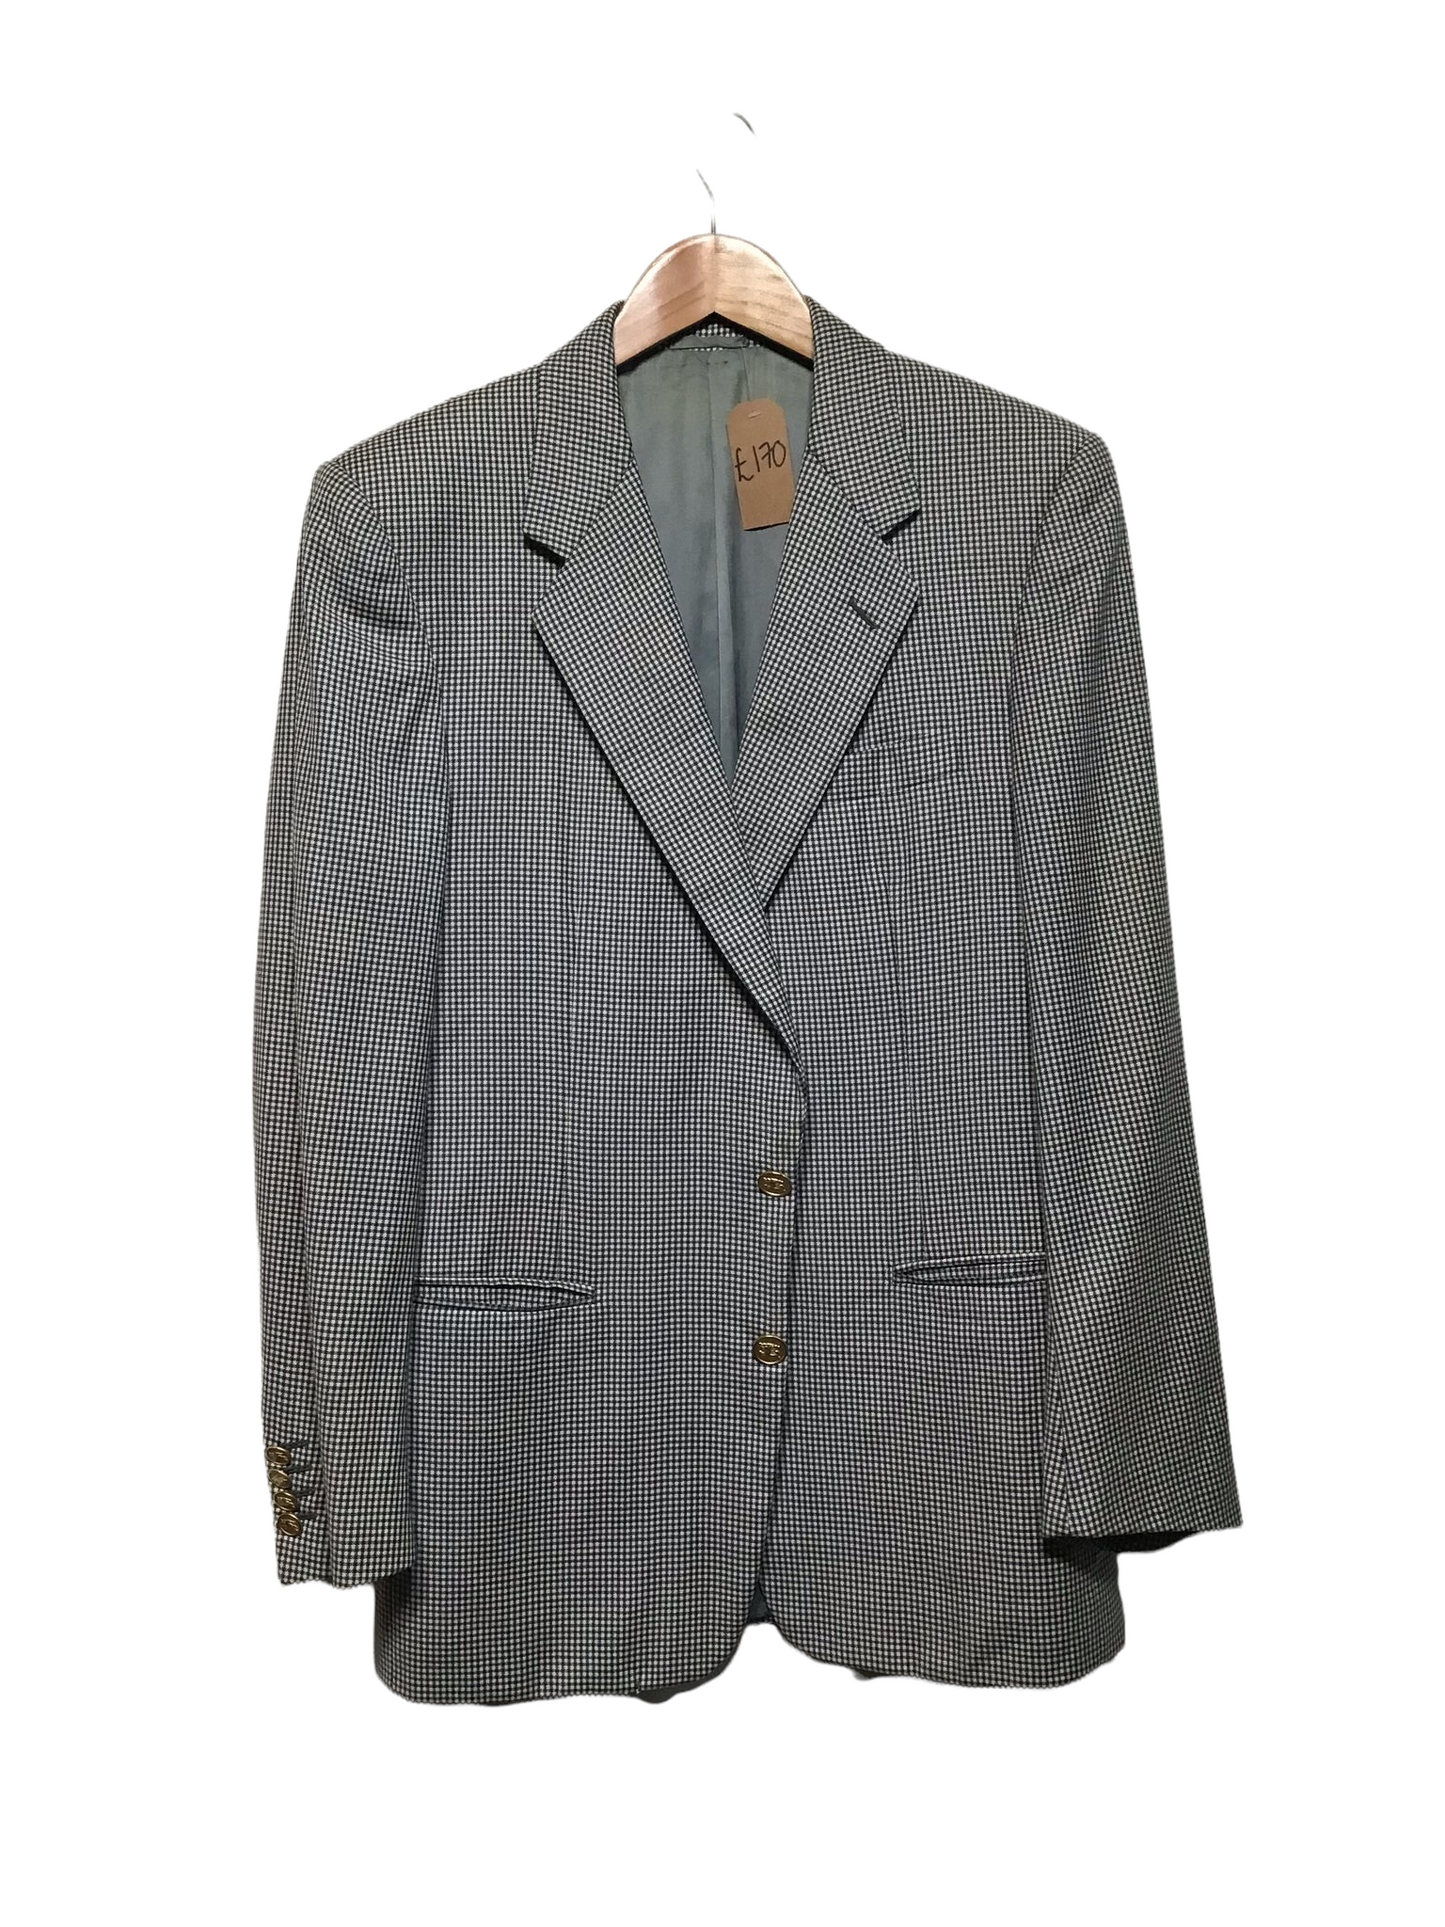 Burberry Chequer Blazer (Size fitted 38”)